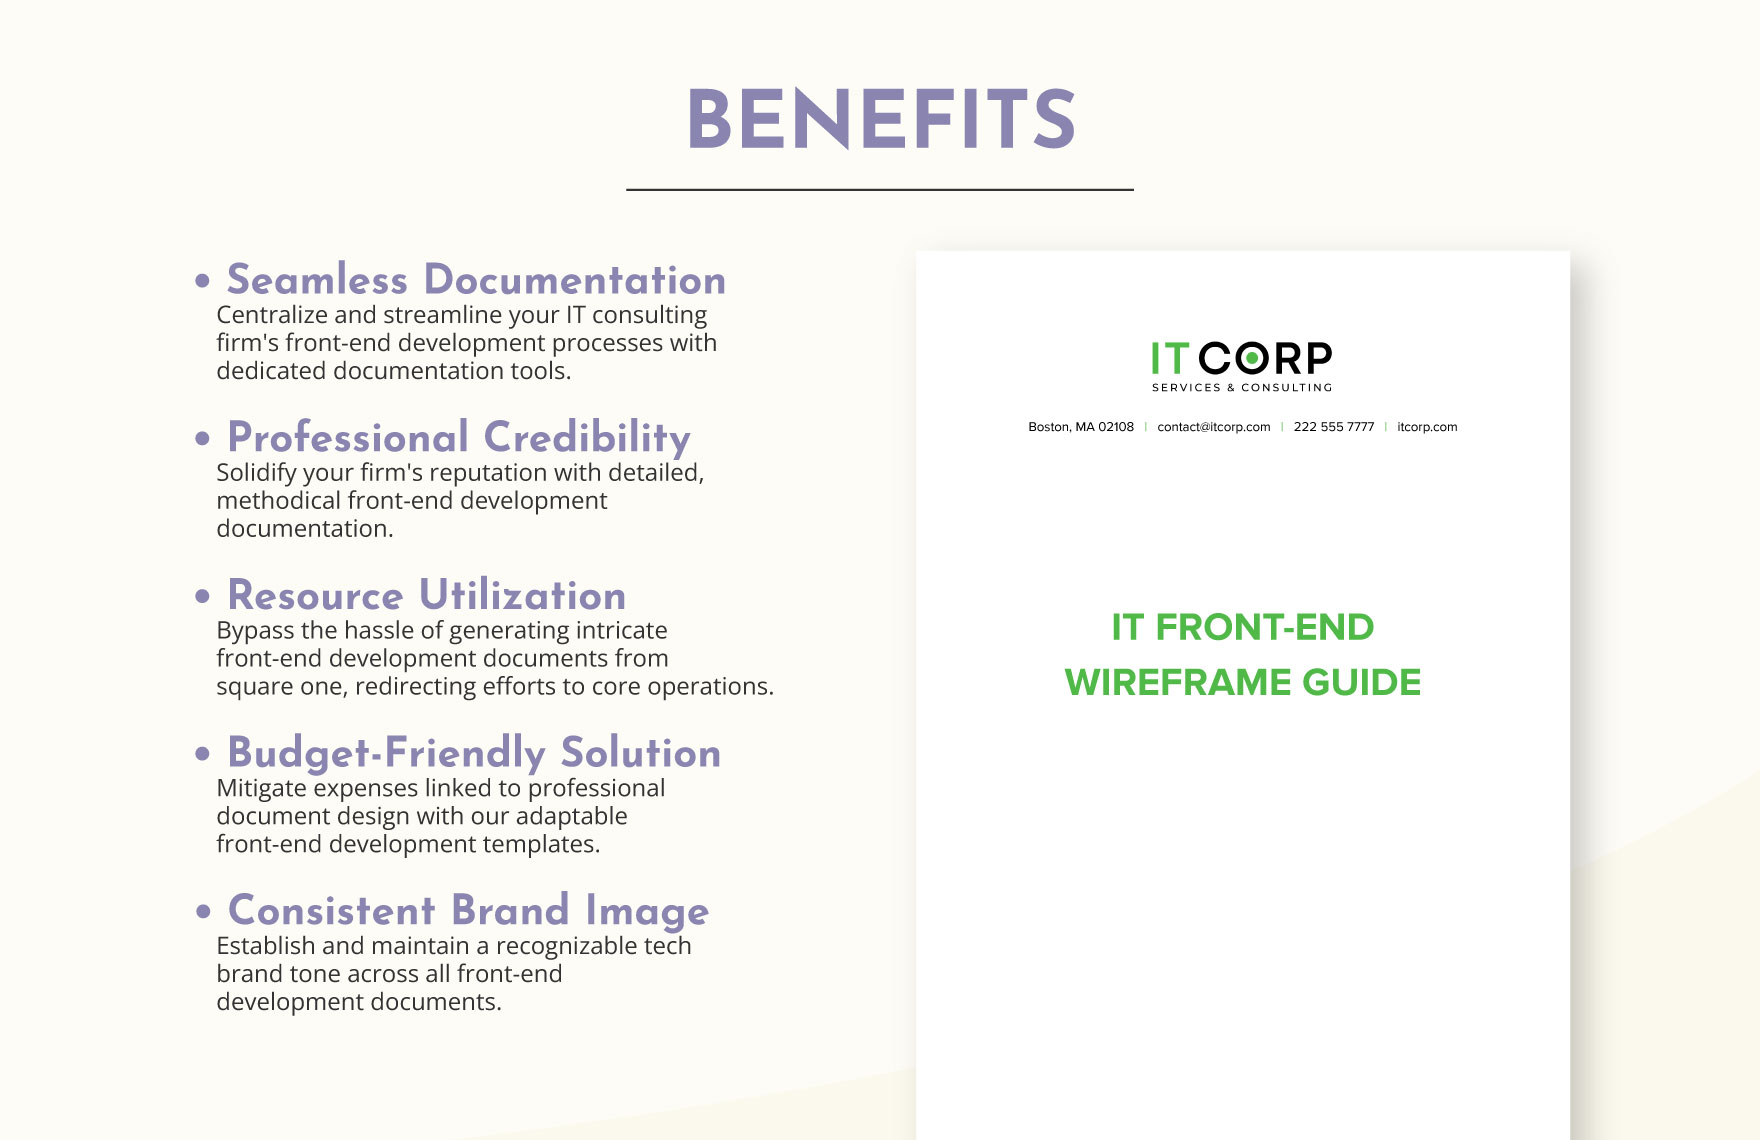 IT Front-End Wireframe Guide Template